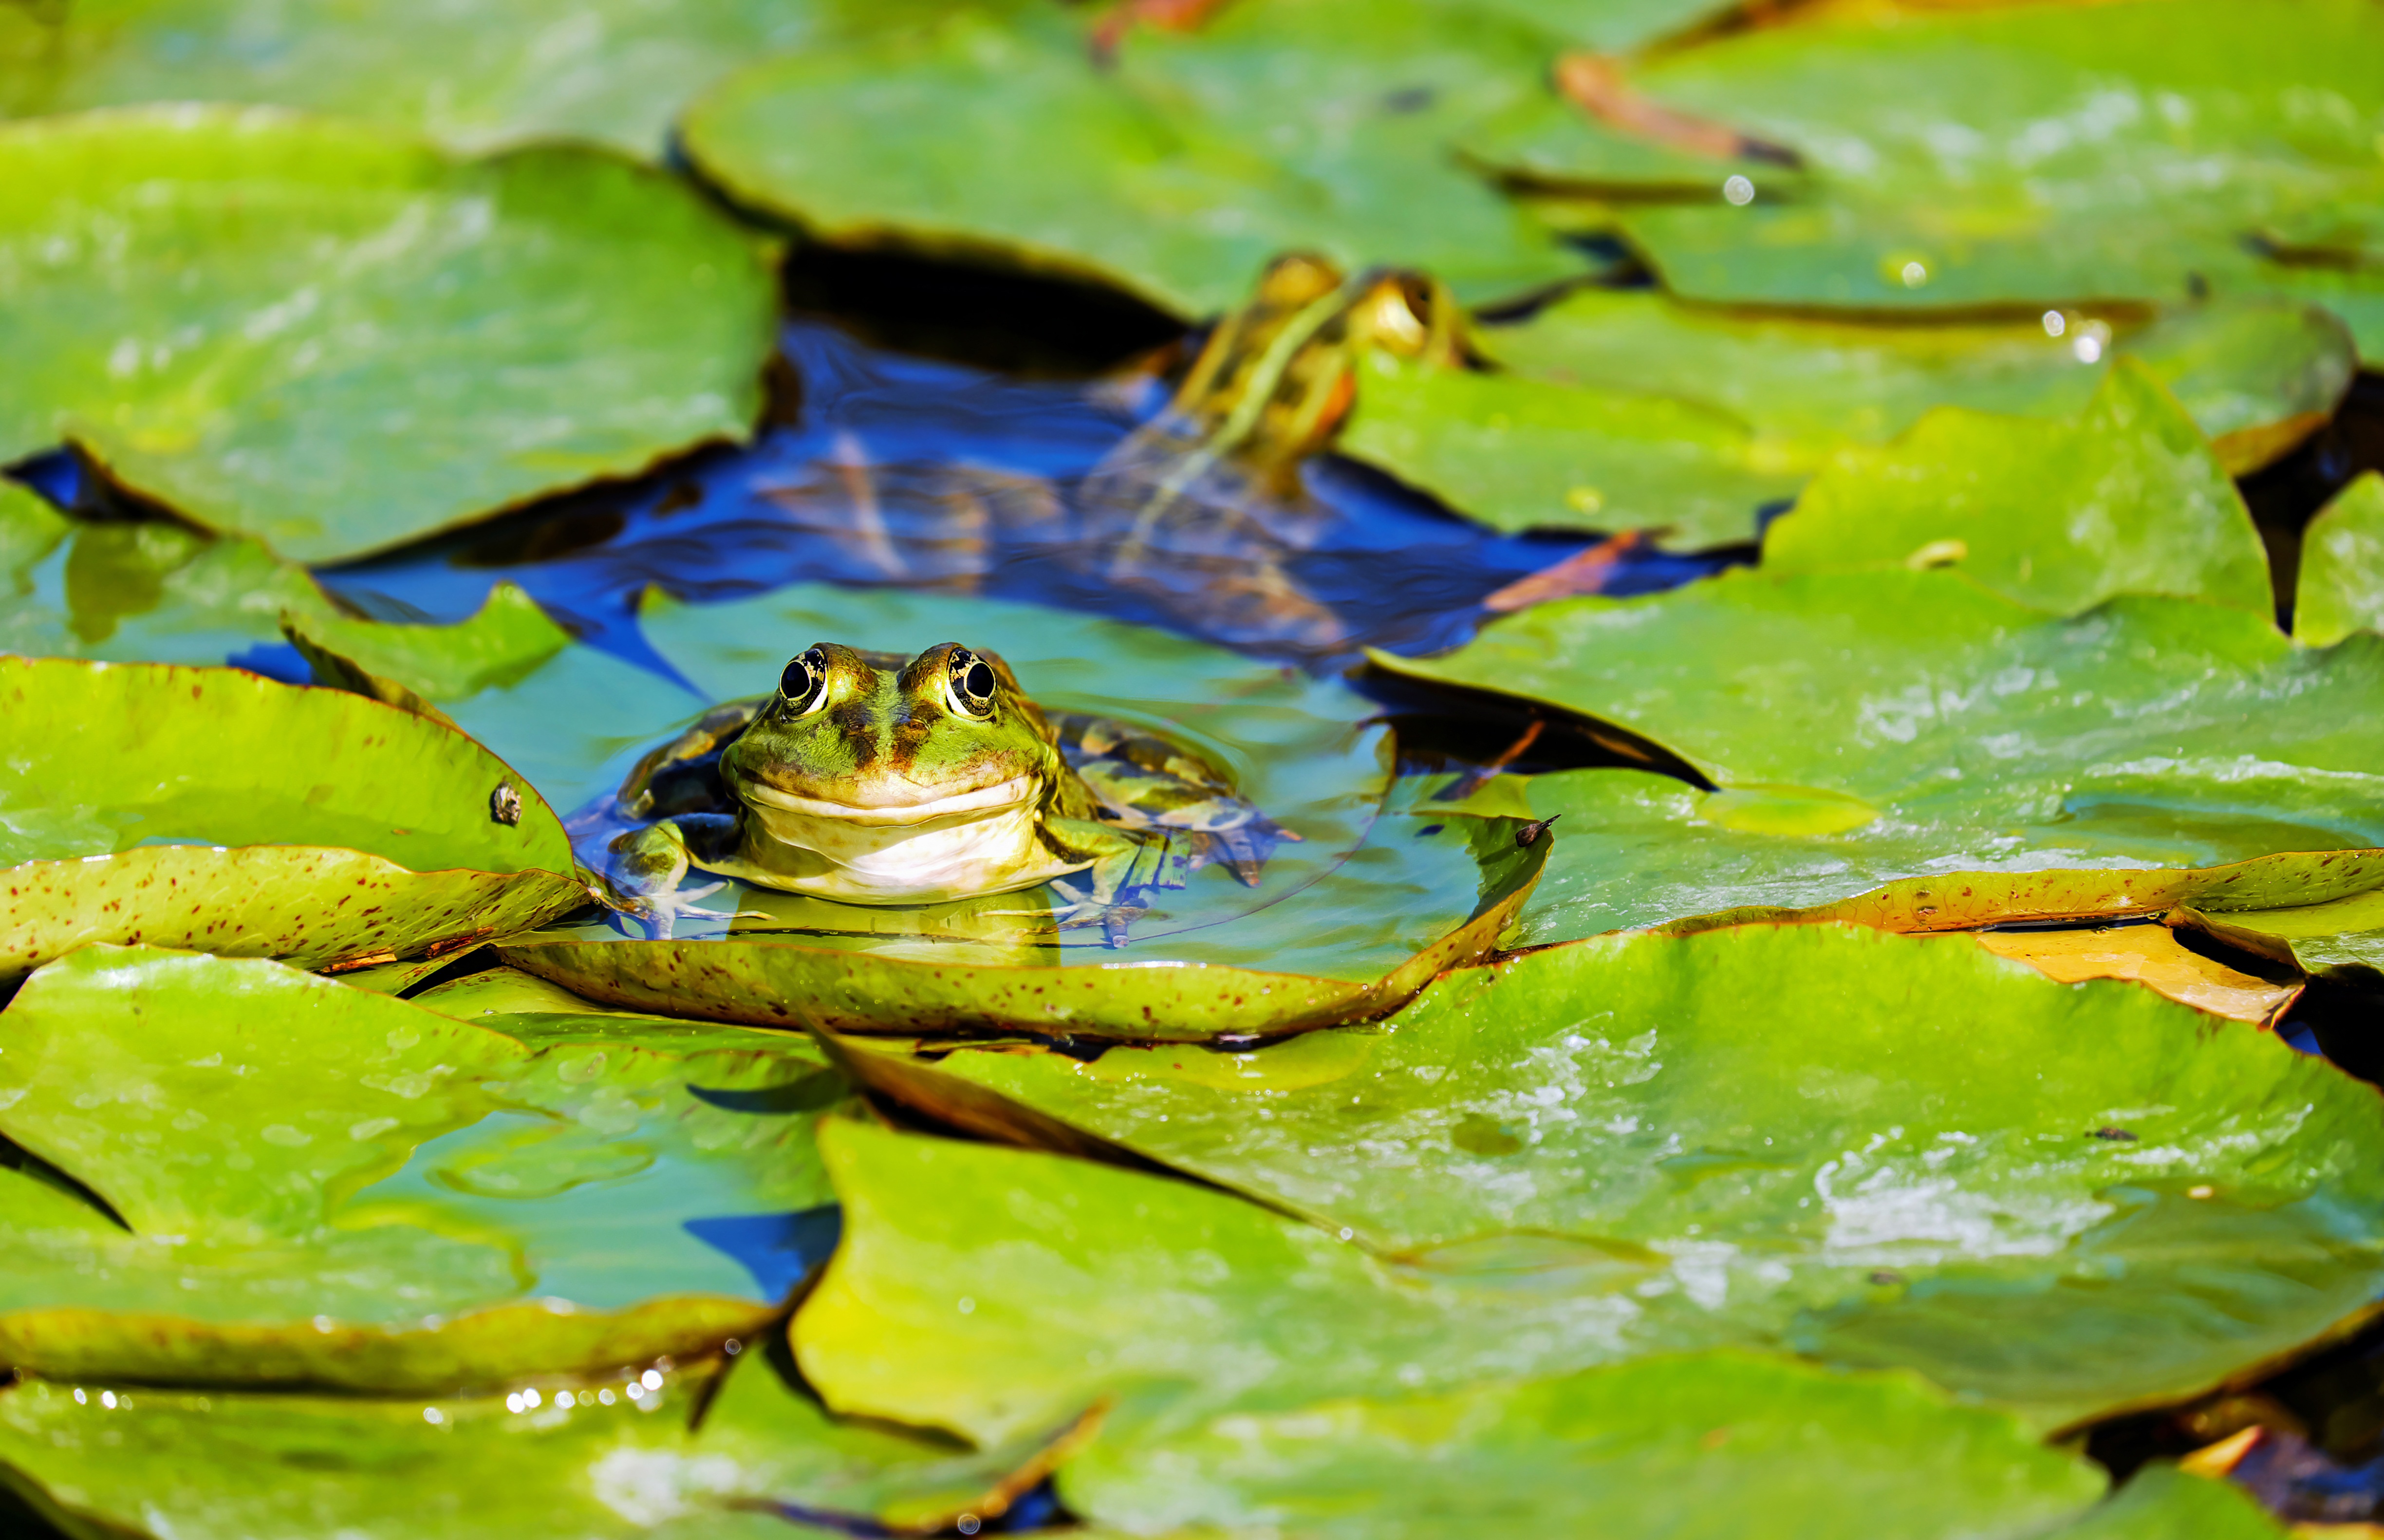 Green Frog on a Lily Pad by Couleur